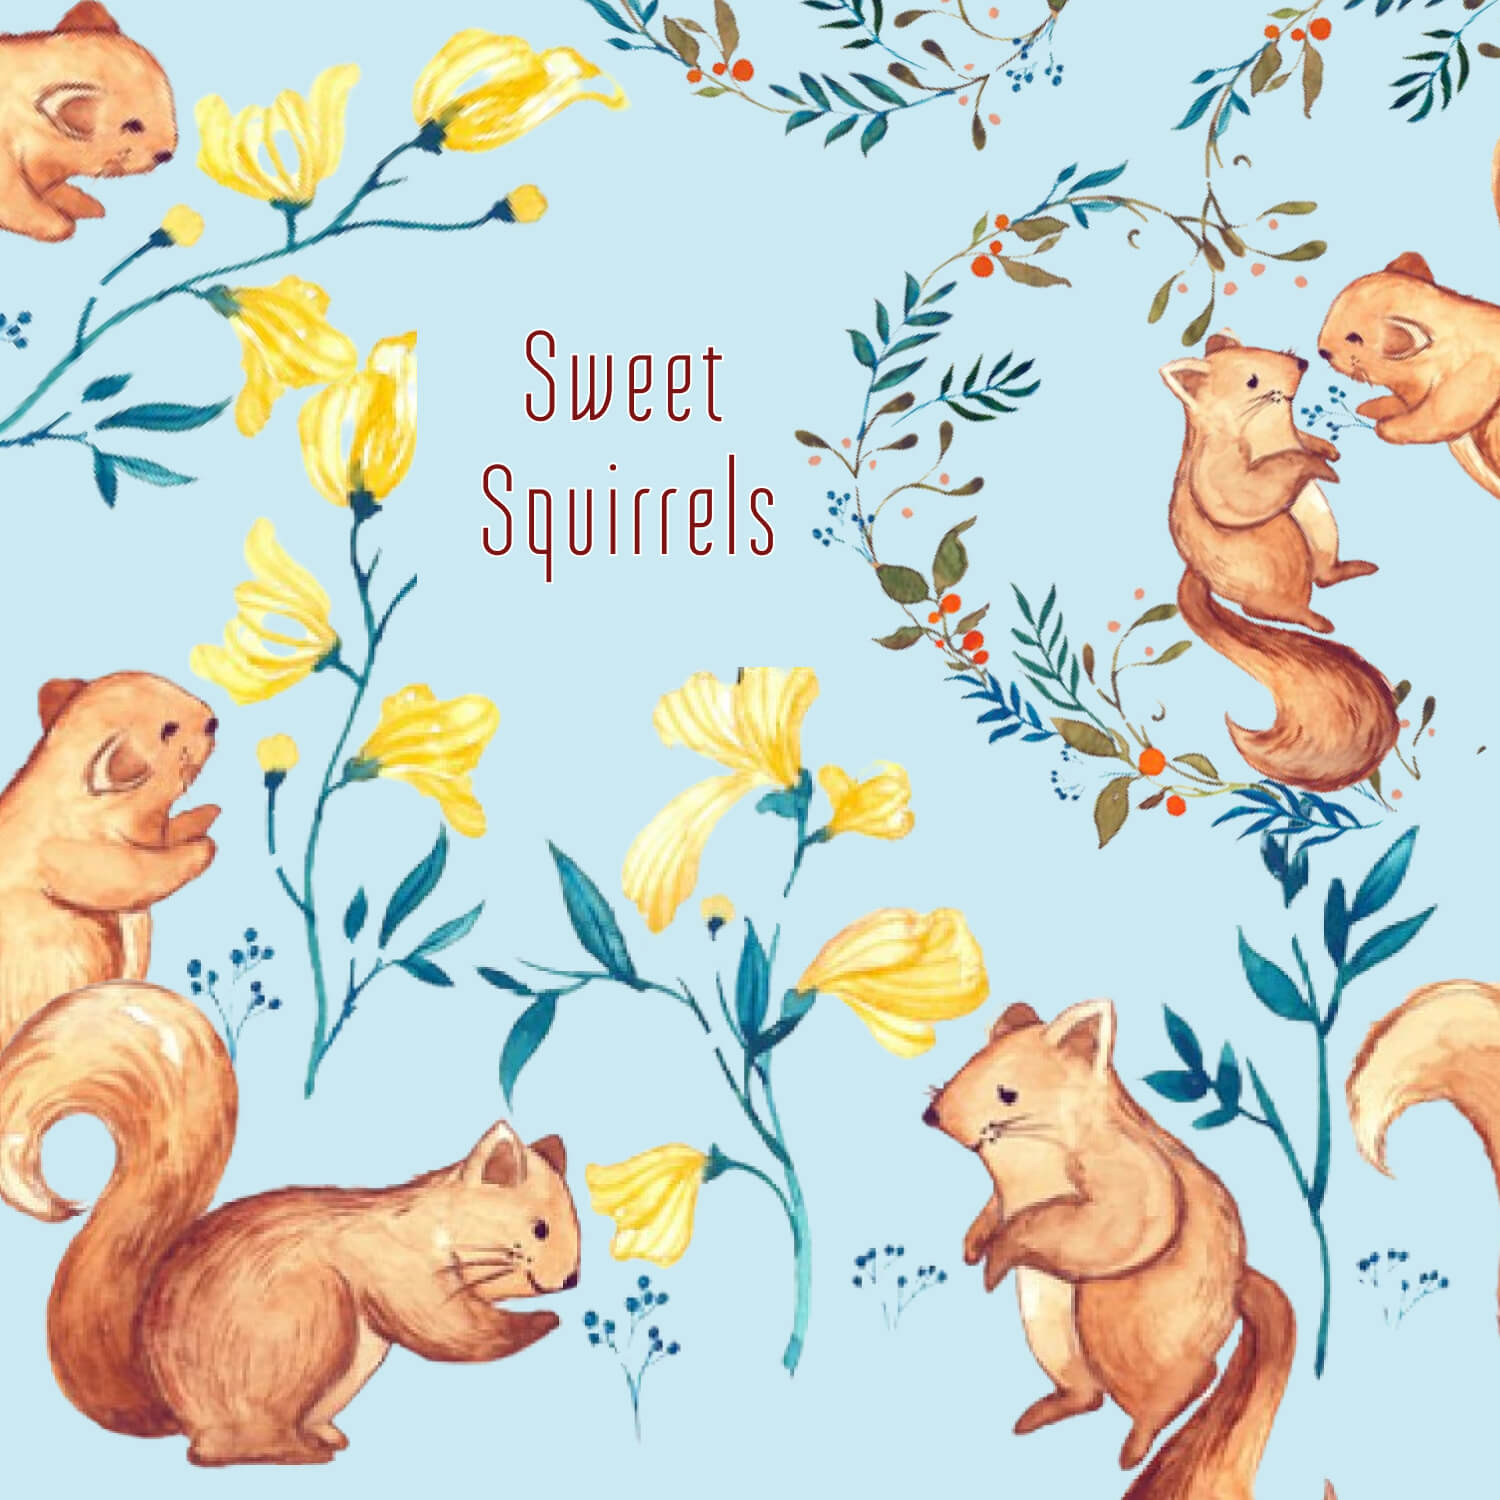 Many red smiling squirrels with yellow and other colors around on a blue background.